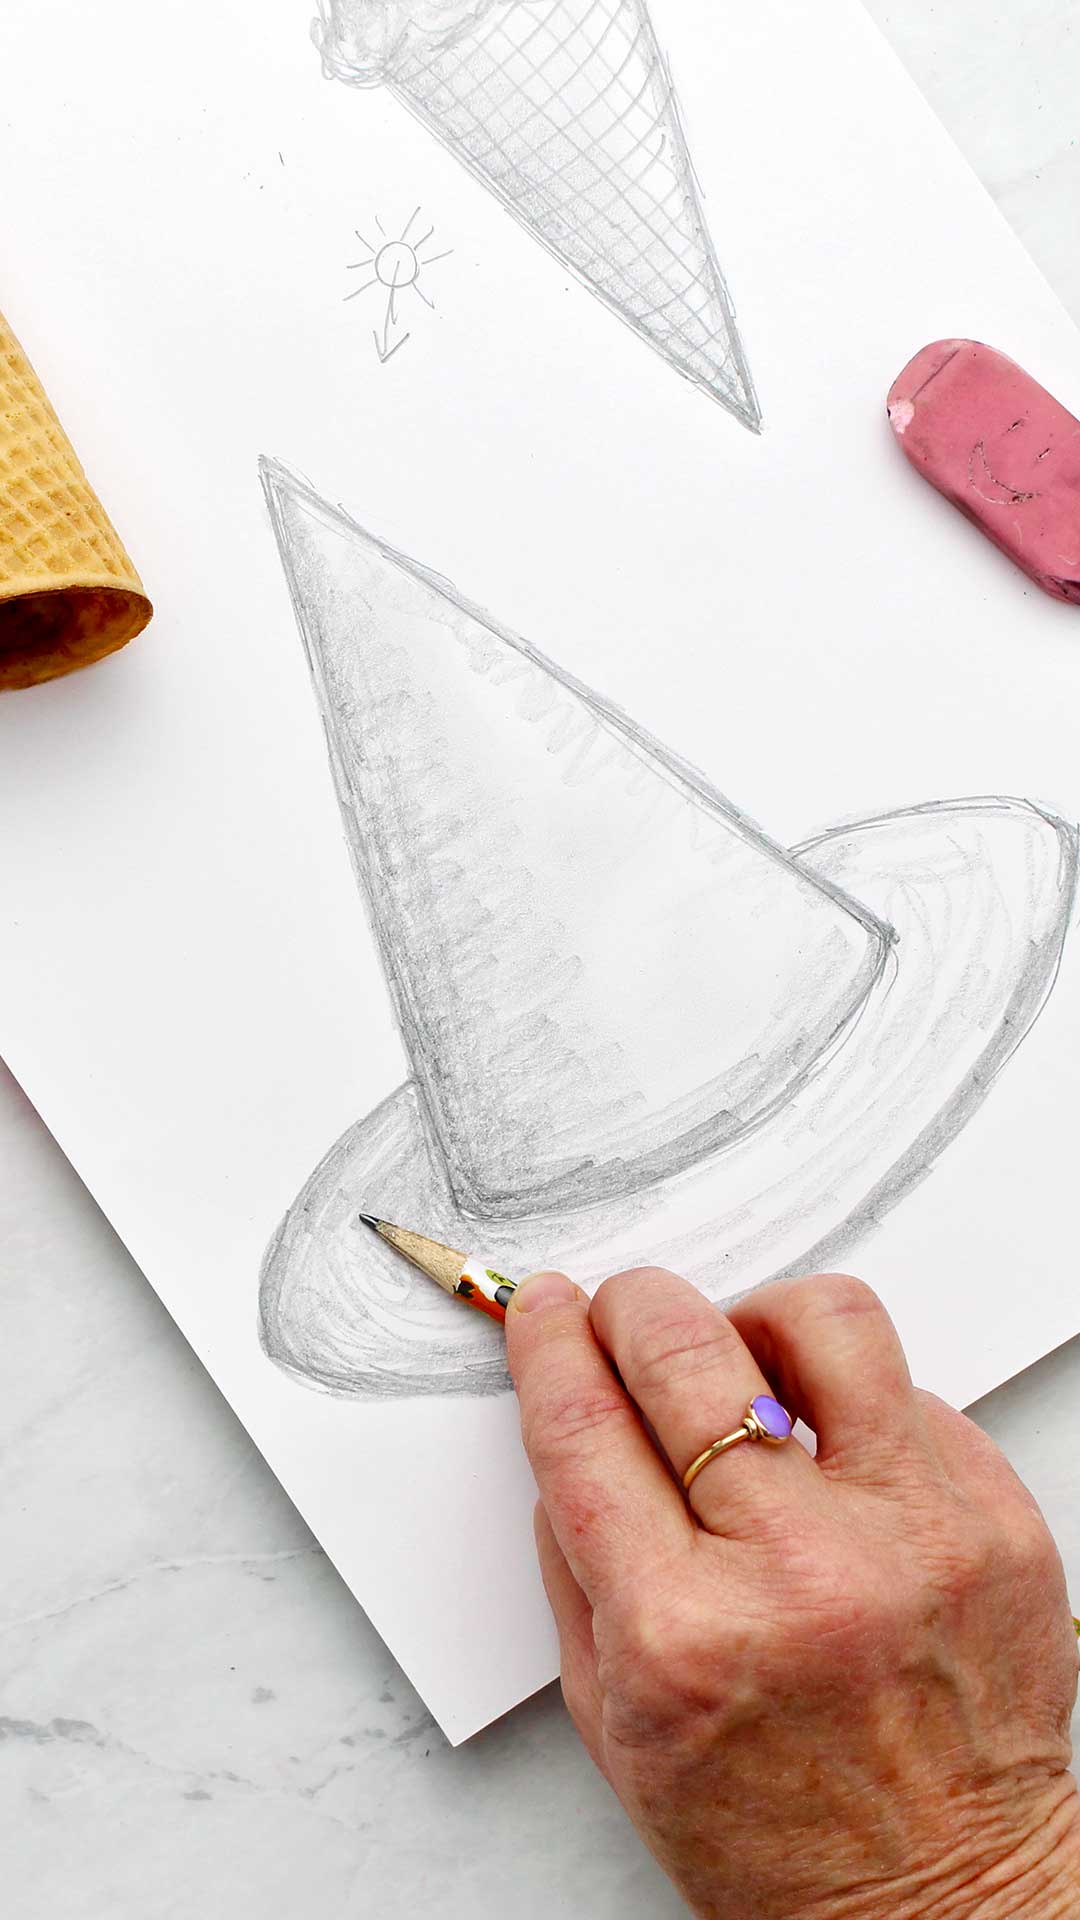 A hand shading with the side of a pencil on a drawing of a witches hat.